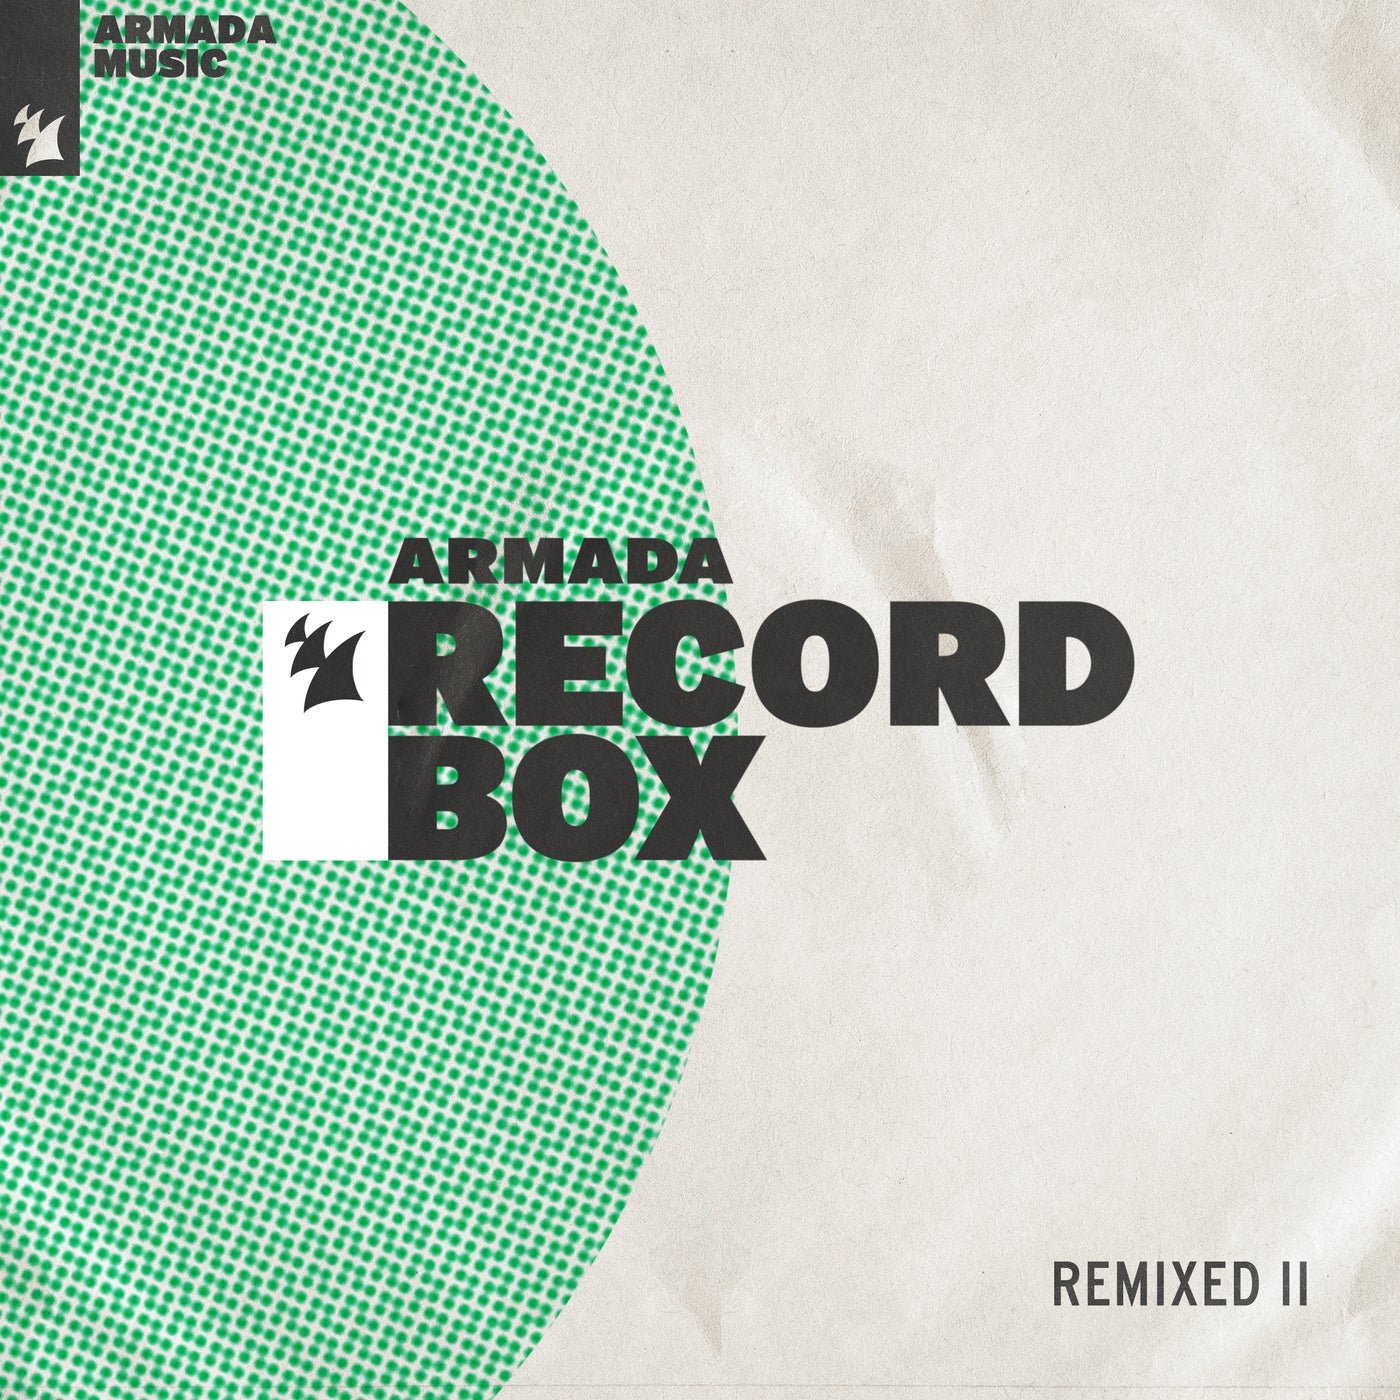 Armada Record Box - REMIXED II - Extended Versions